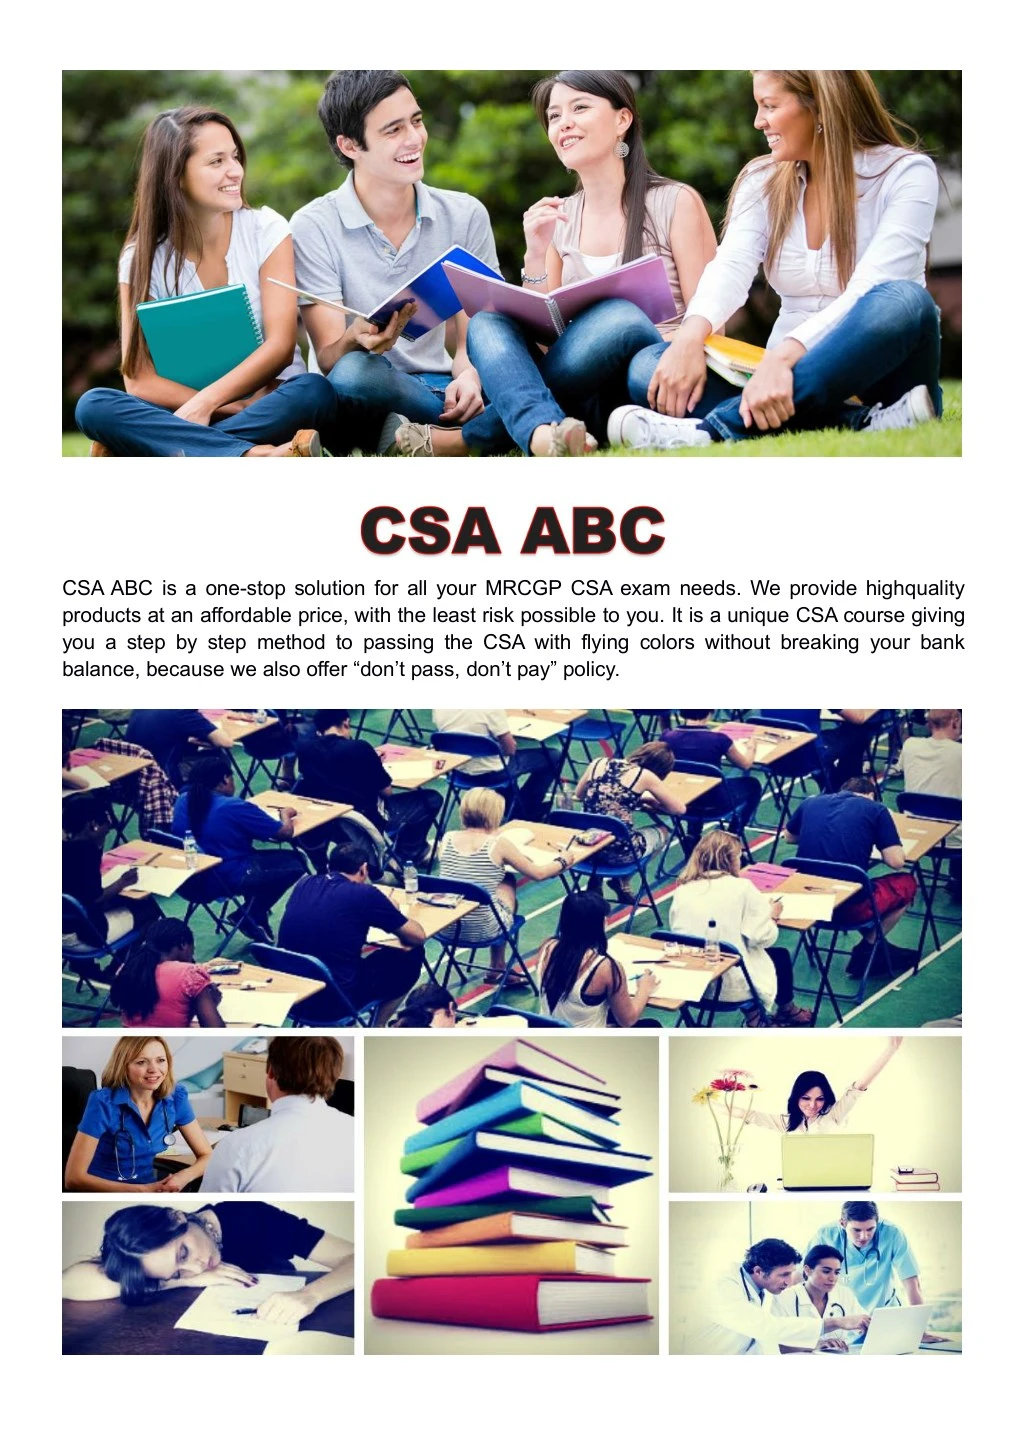 csa abc is a one stop solution for all your mrcgp